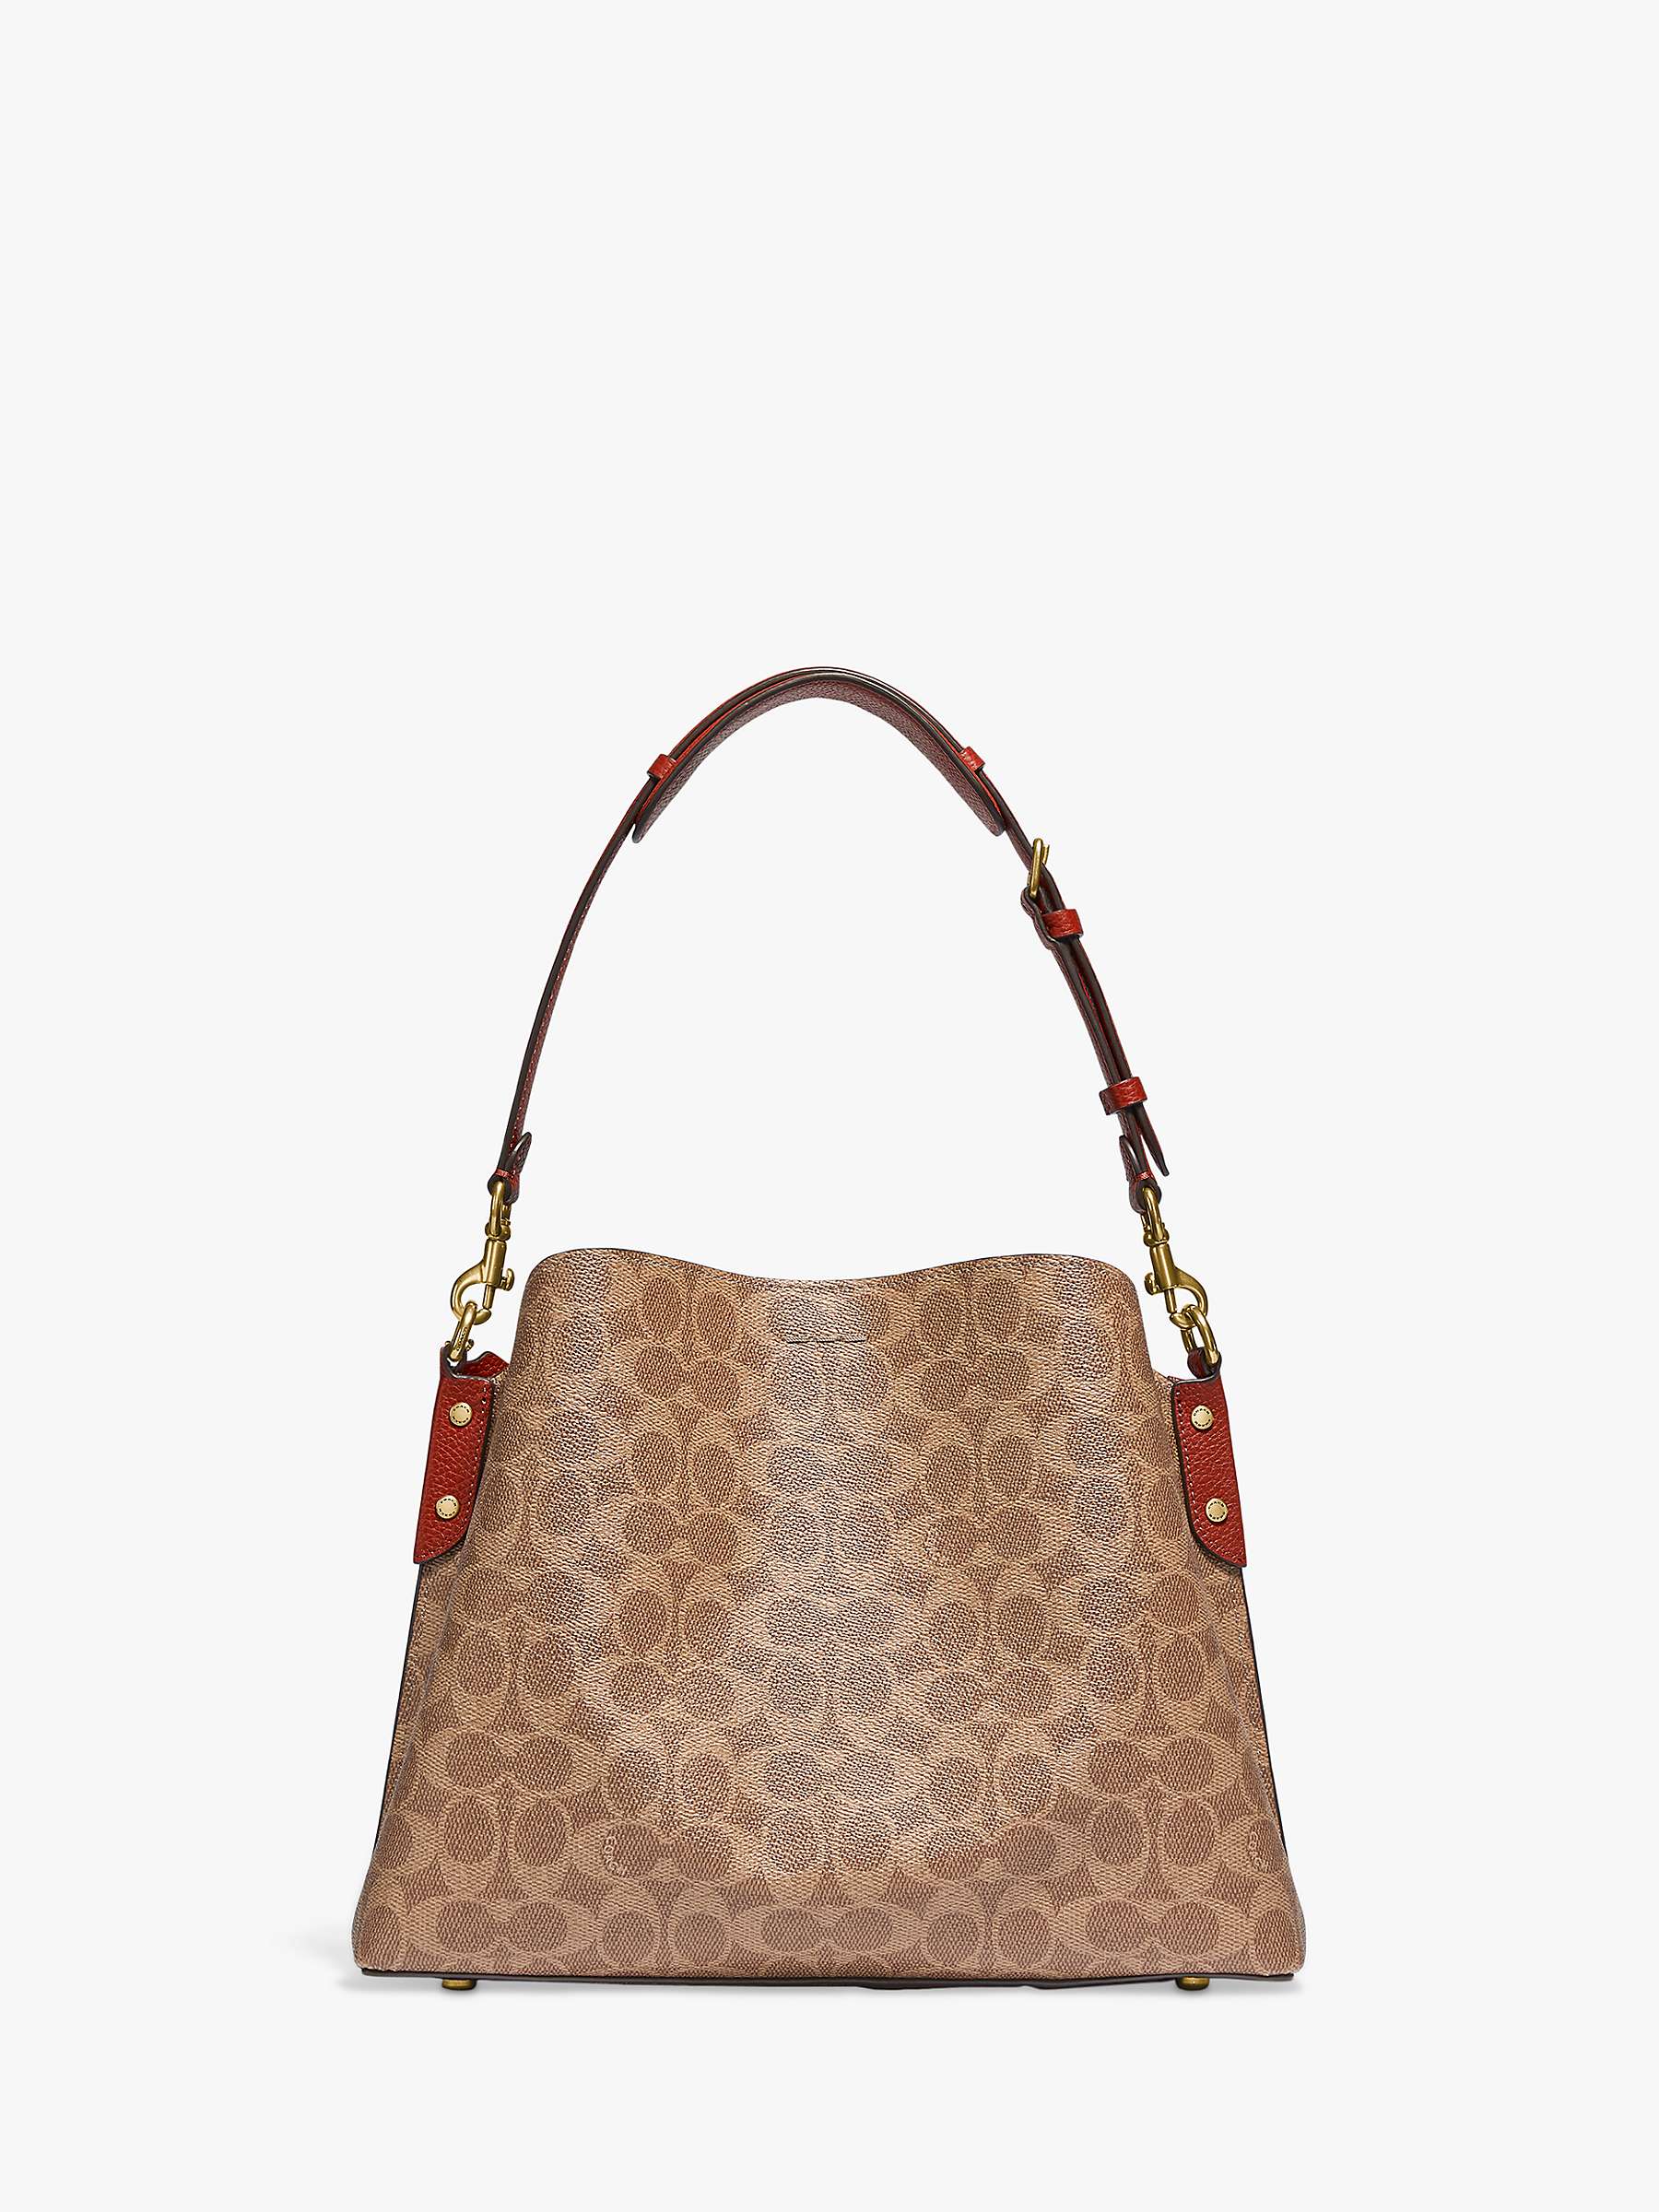 Buy Coach Willow Signature Leather Shoulder Bag, Tan Rust Online at johnlewis.com